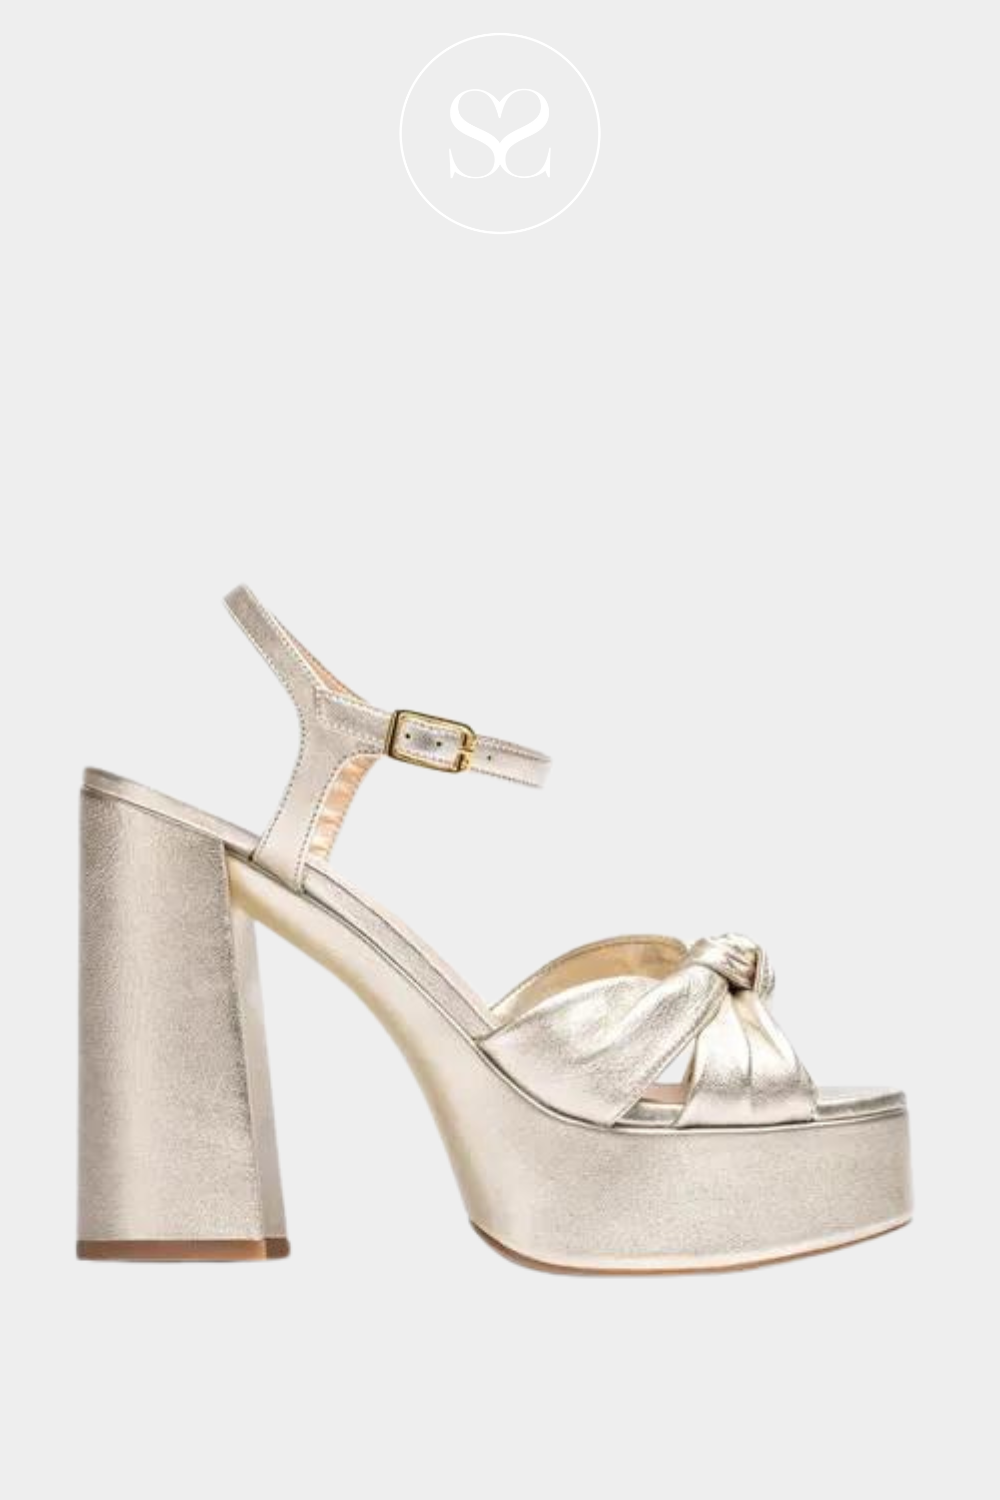 Speck Strappy Heels - Gold Metallic Leather – Siren Shoes